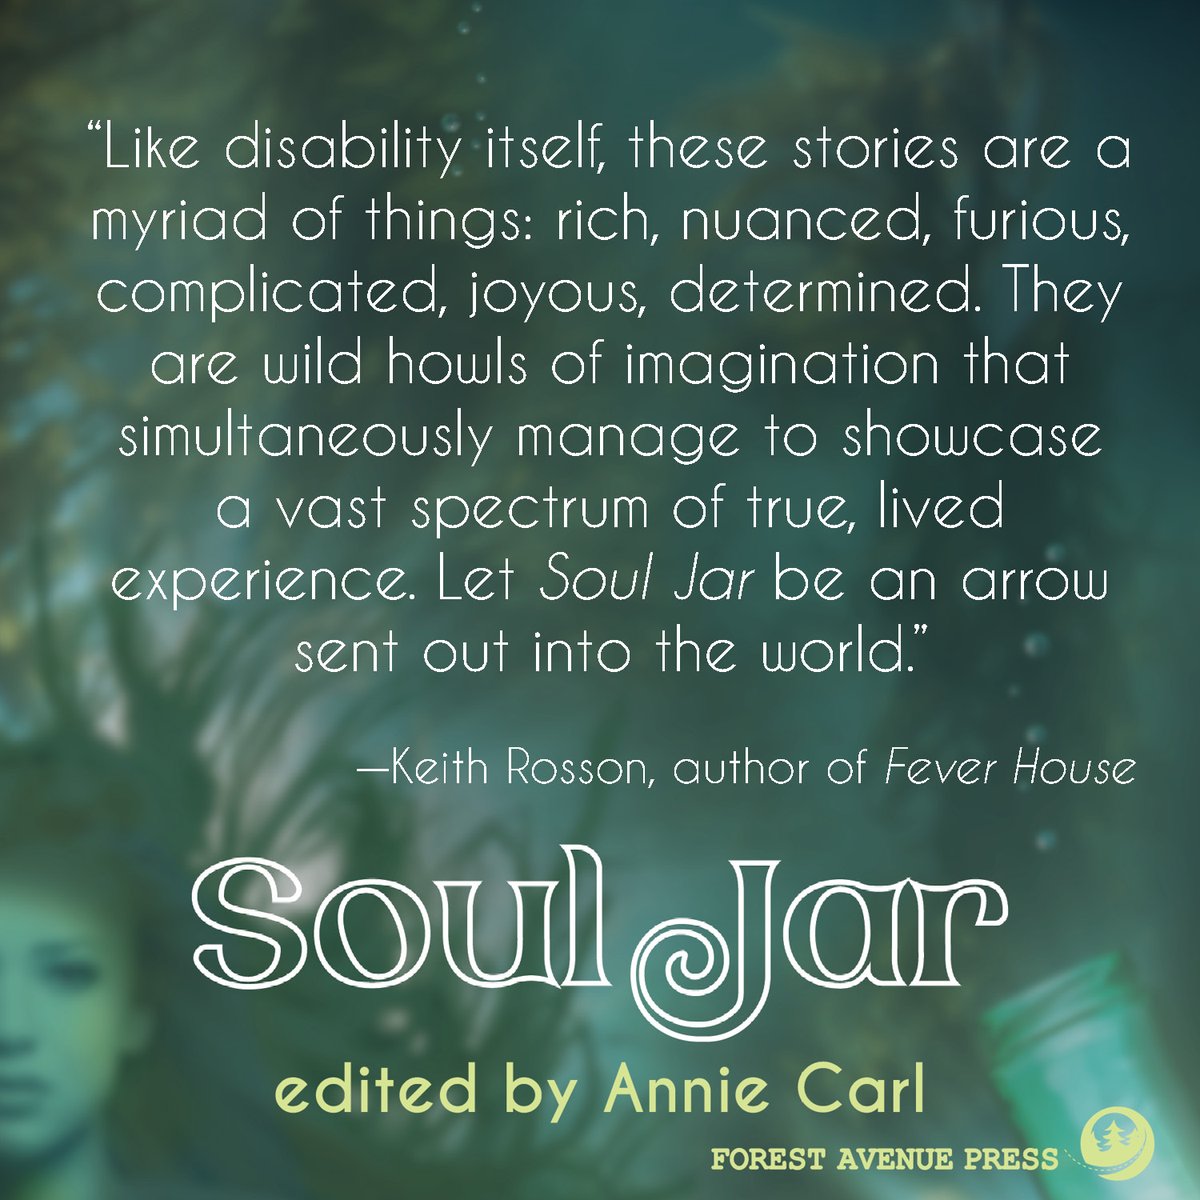 SOUL JAR, our fall release, edited by Annie Carl, and featuring disabled authors, is at the printer! Here's a @keith_rosson quote to stoke your anticipation. #souljar #disability #disabledauthors #fiction #sff